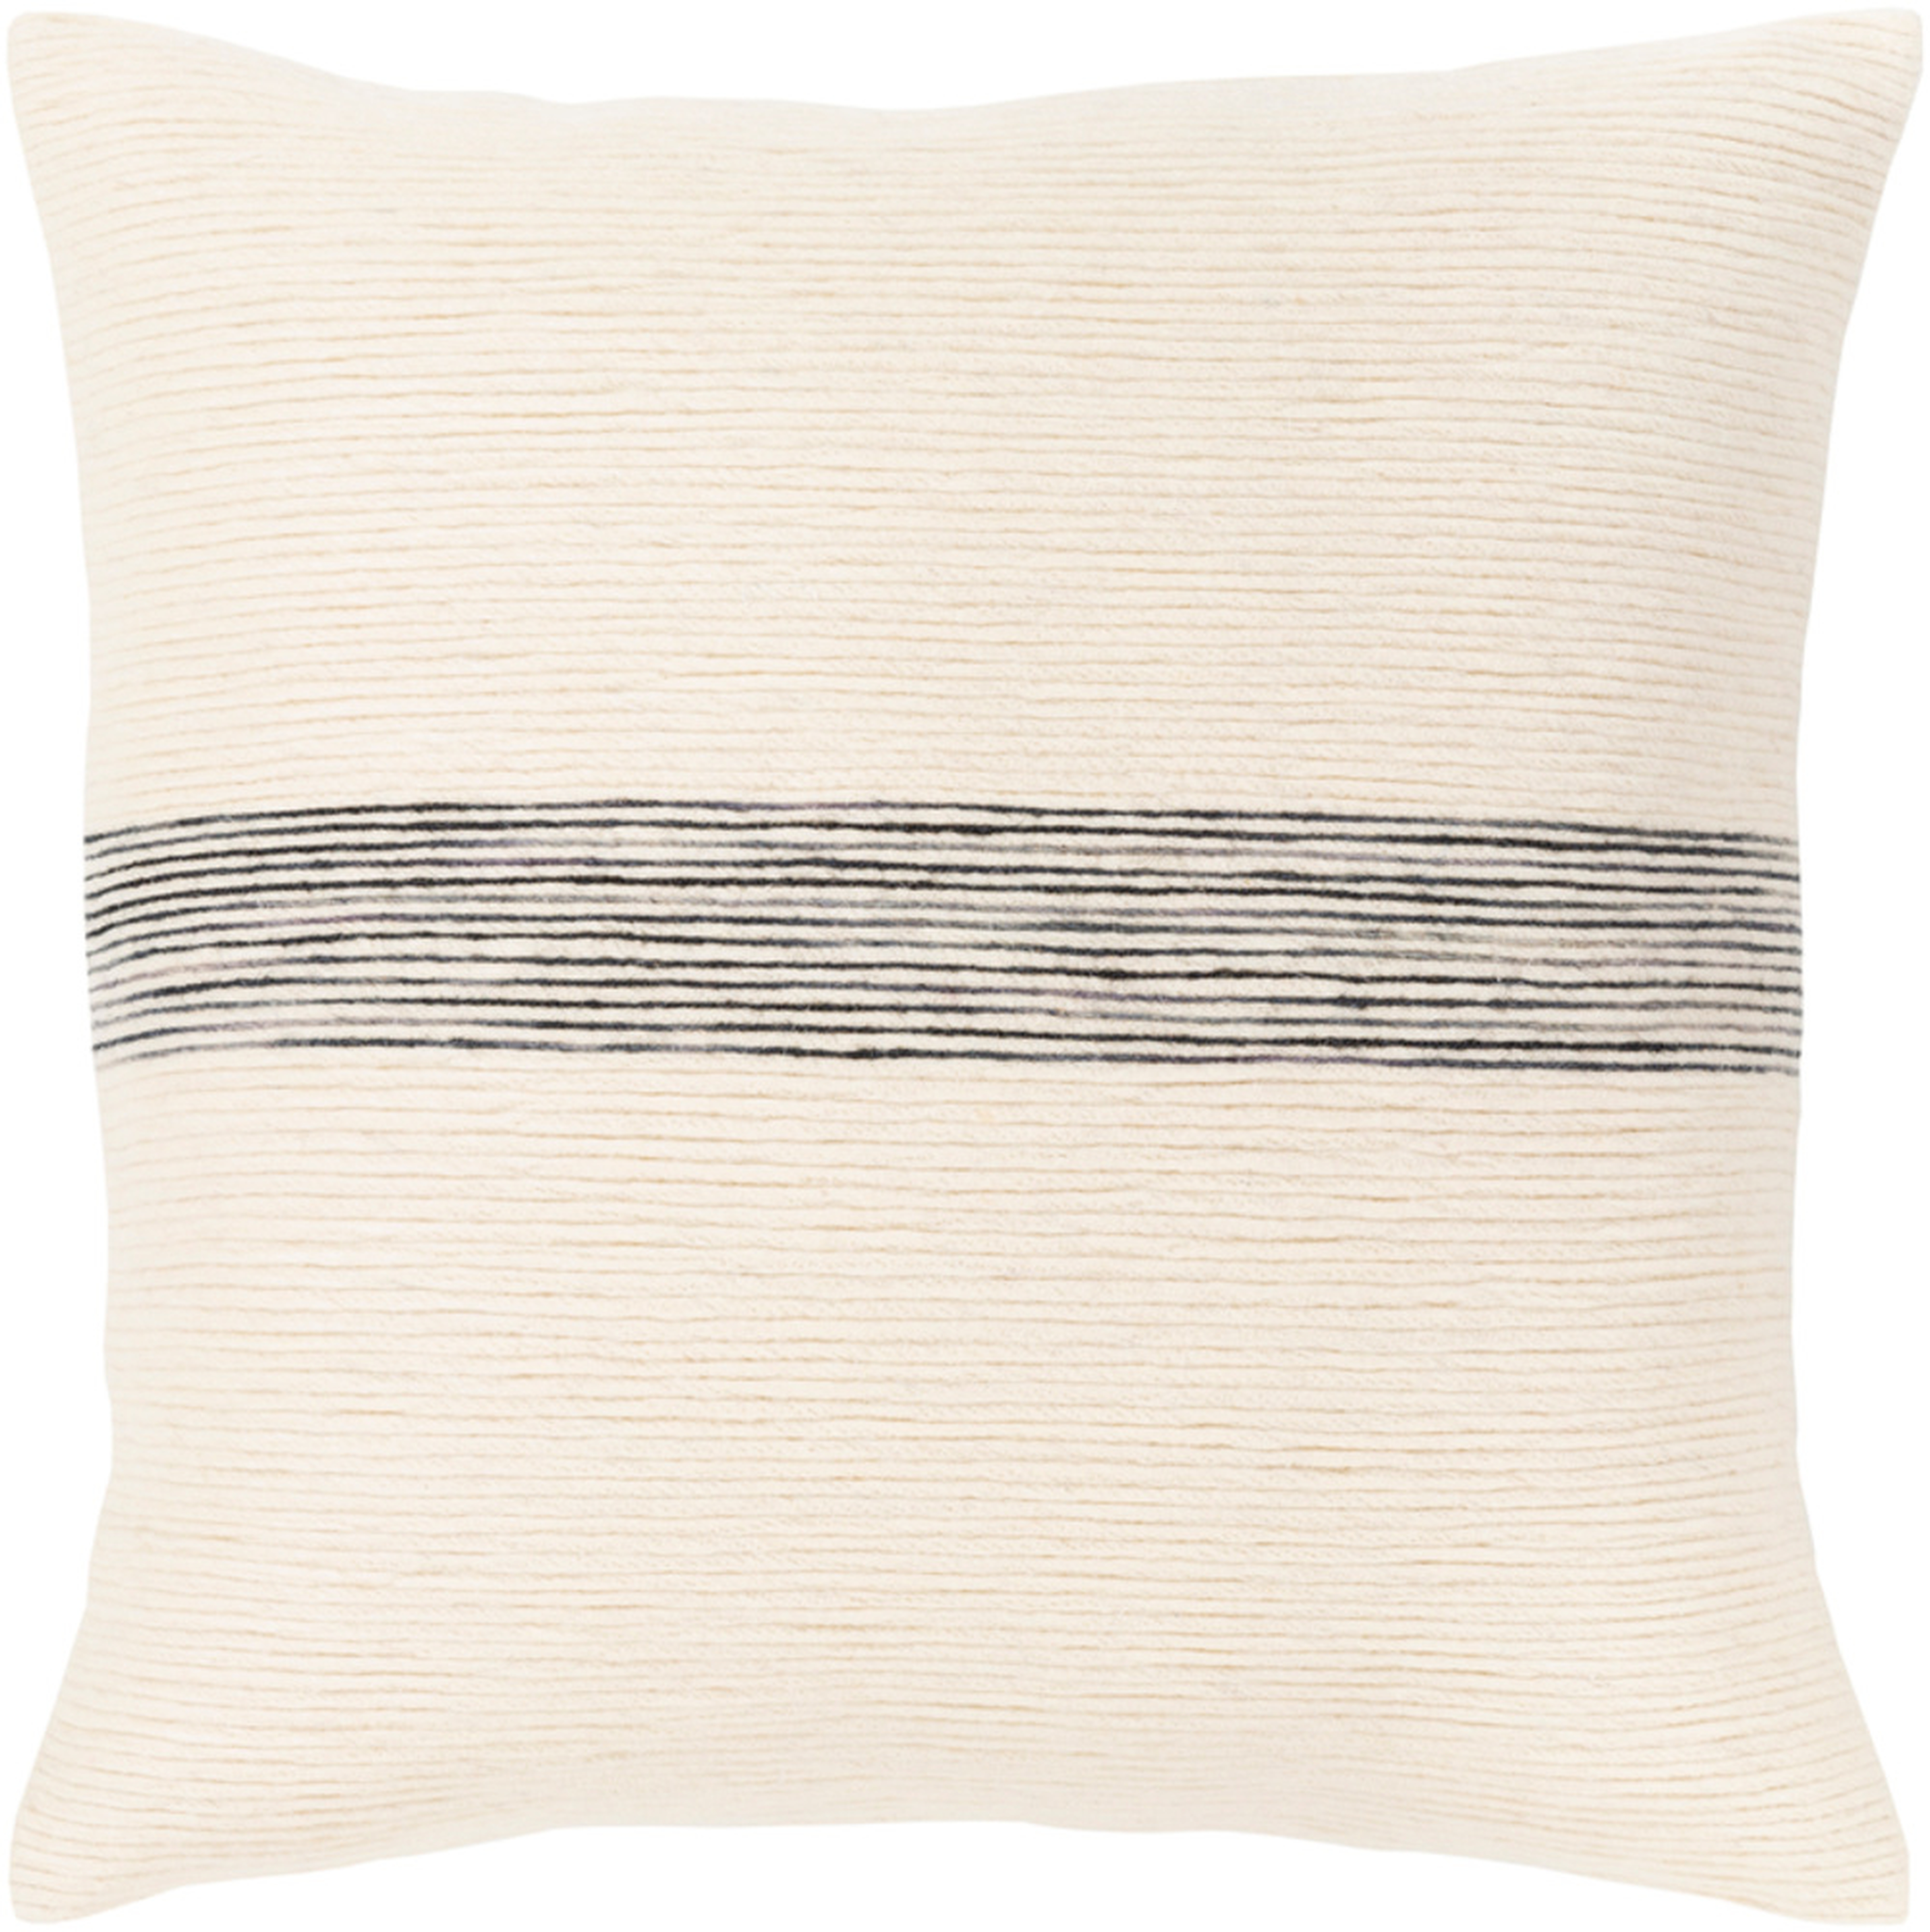 Carine - CIE-002 - 18" x 18" - pillow cover only - Surya